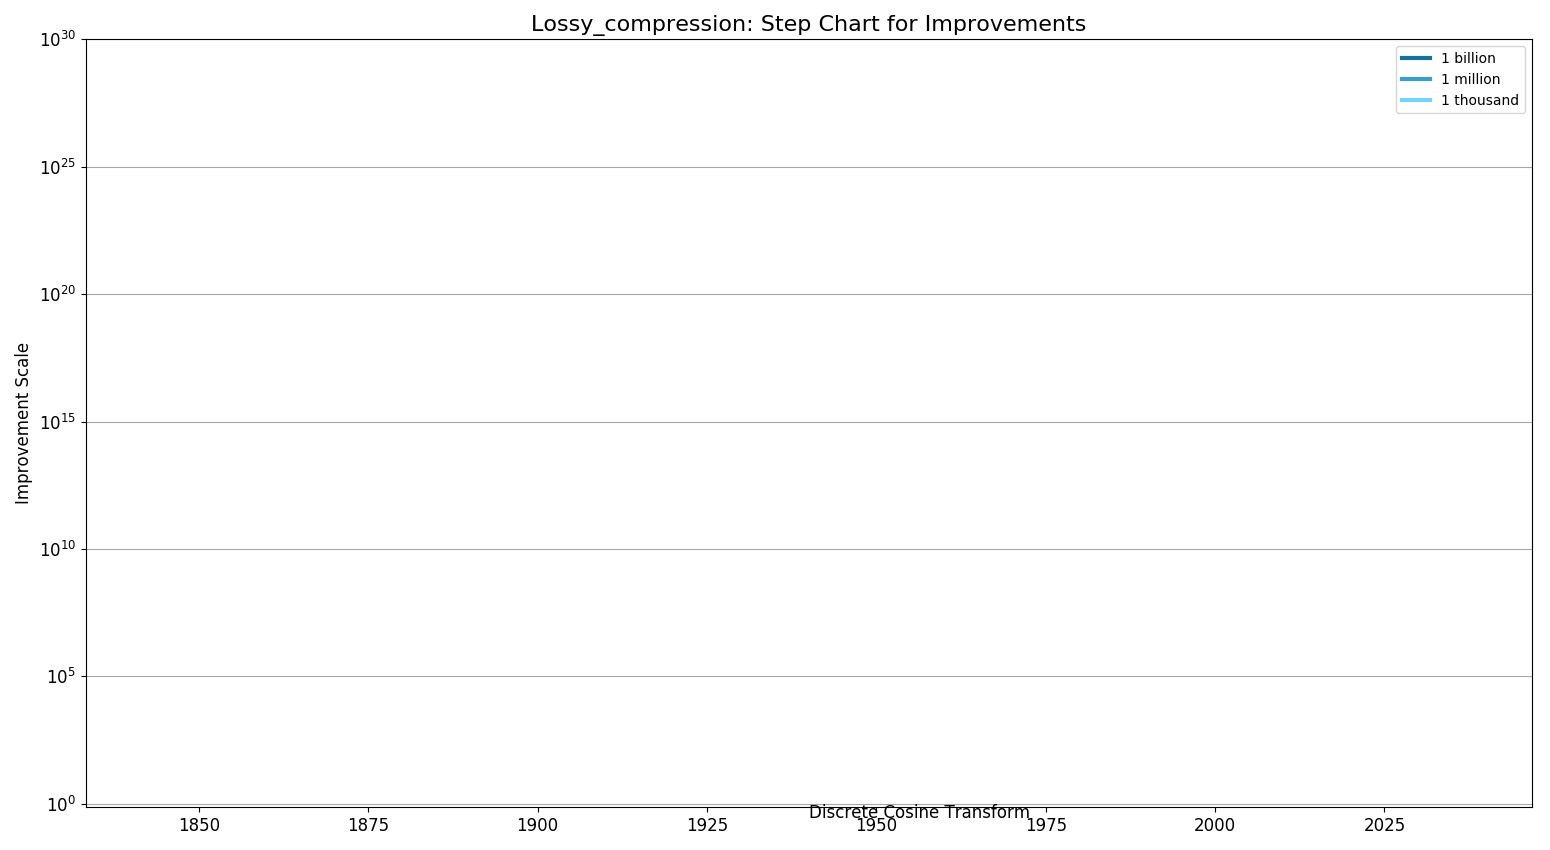 File:Lossy compressionStepChart.png